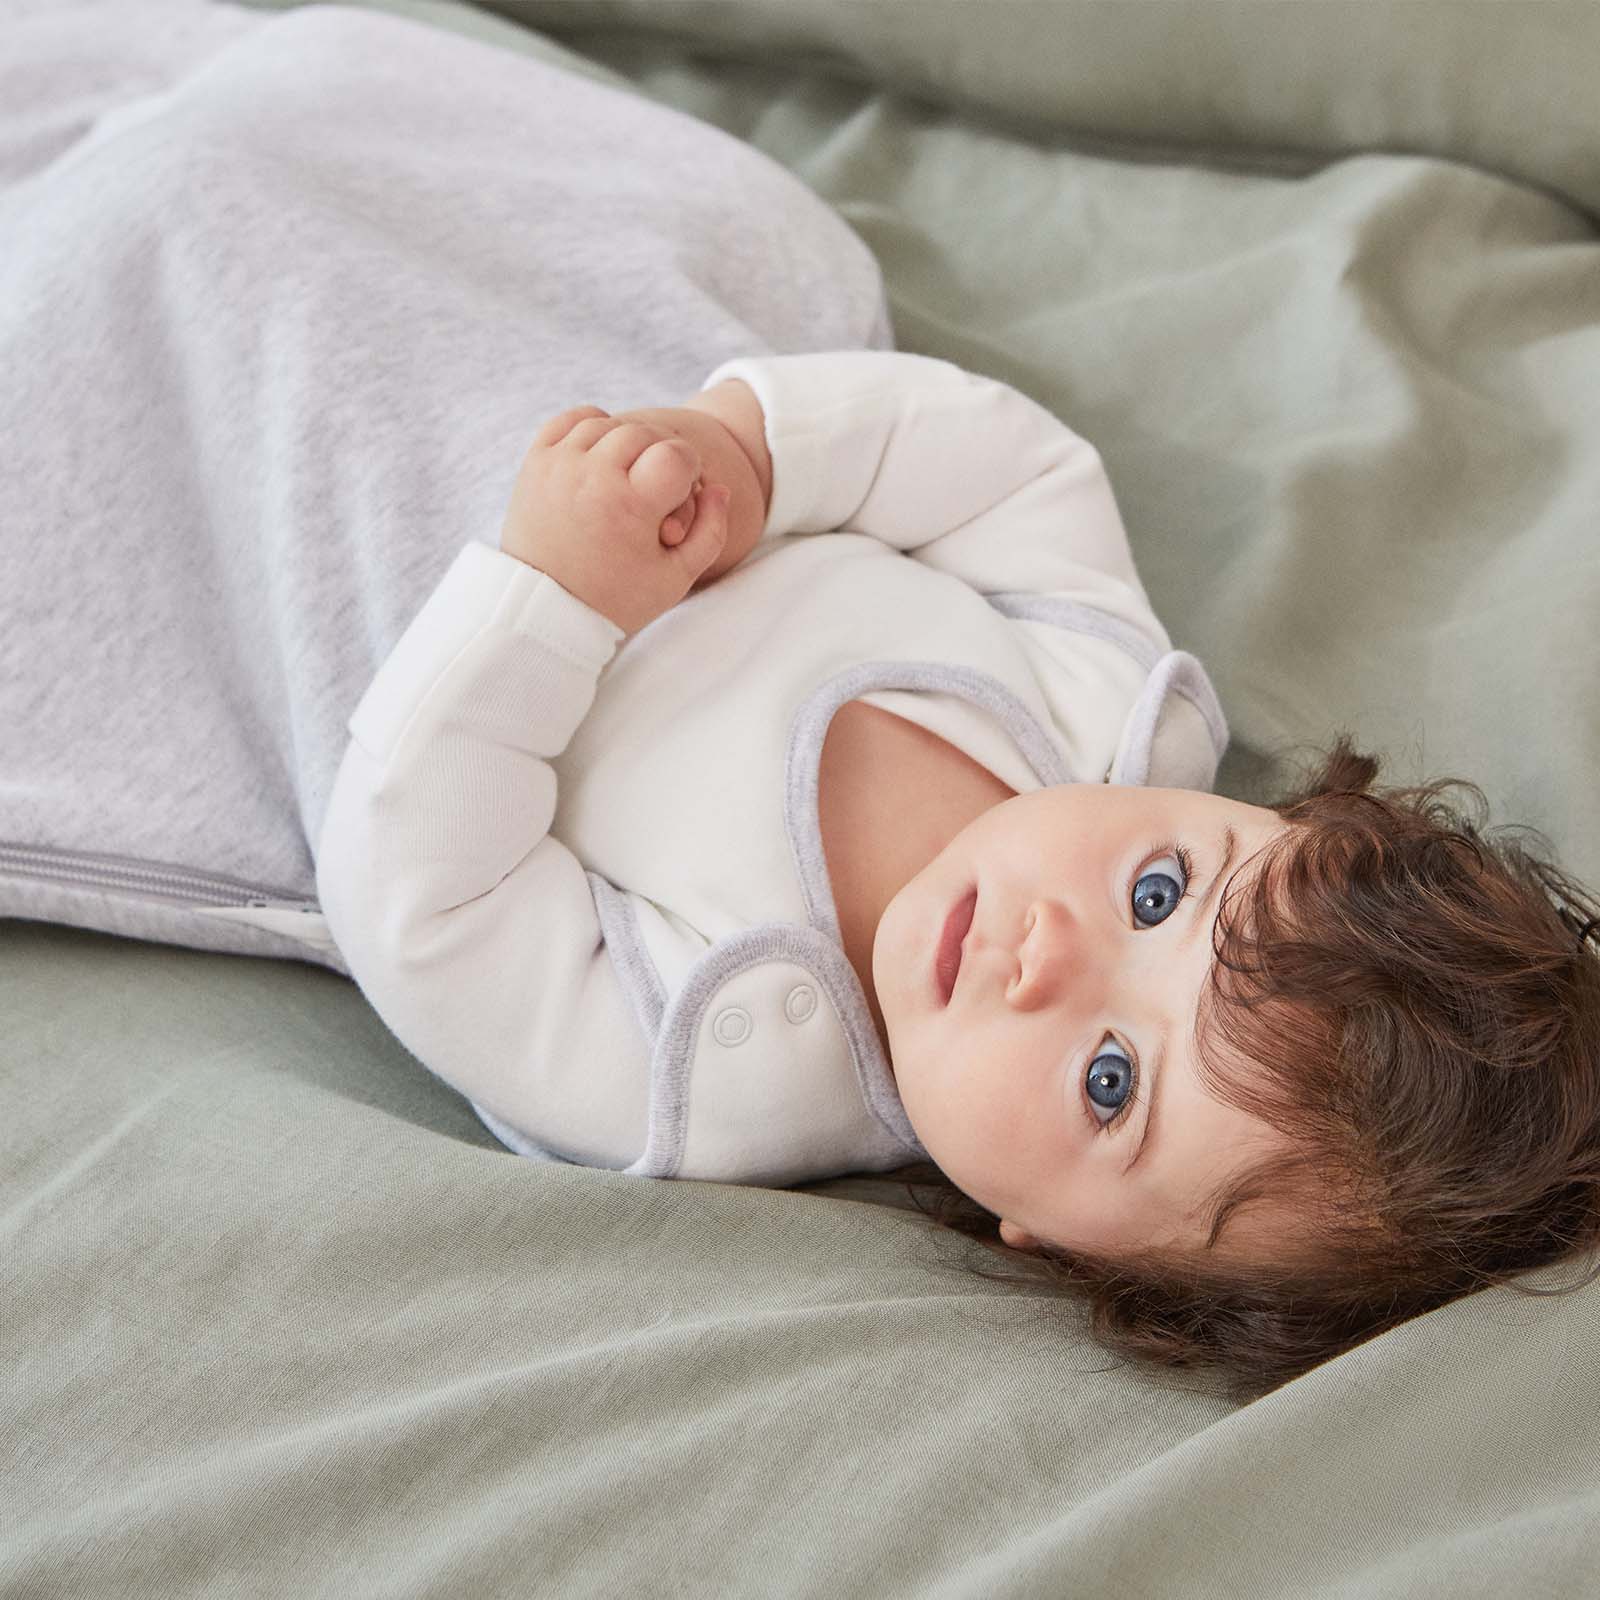 A blue-eyed baby laying in a white onesie on a green sheet.